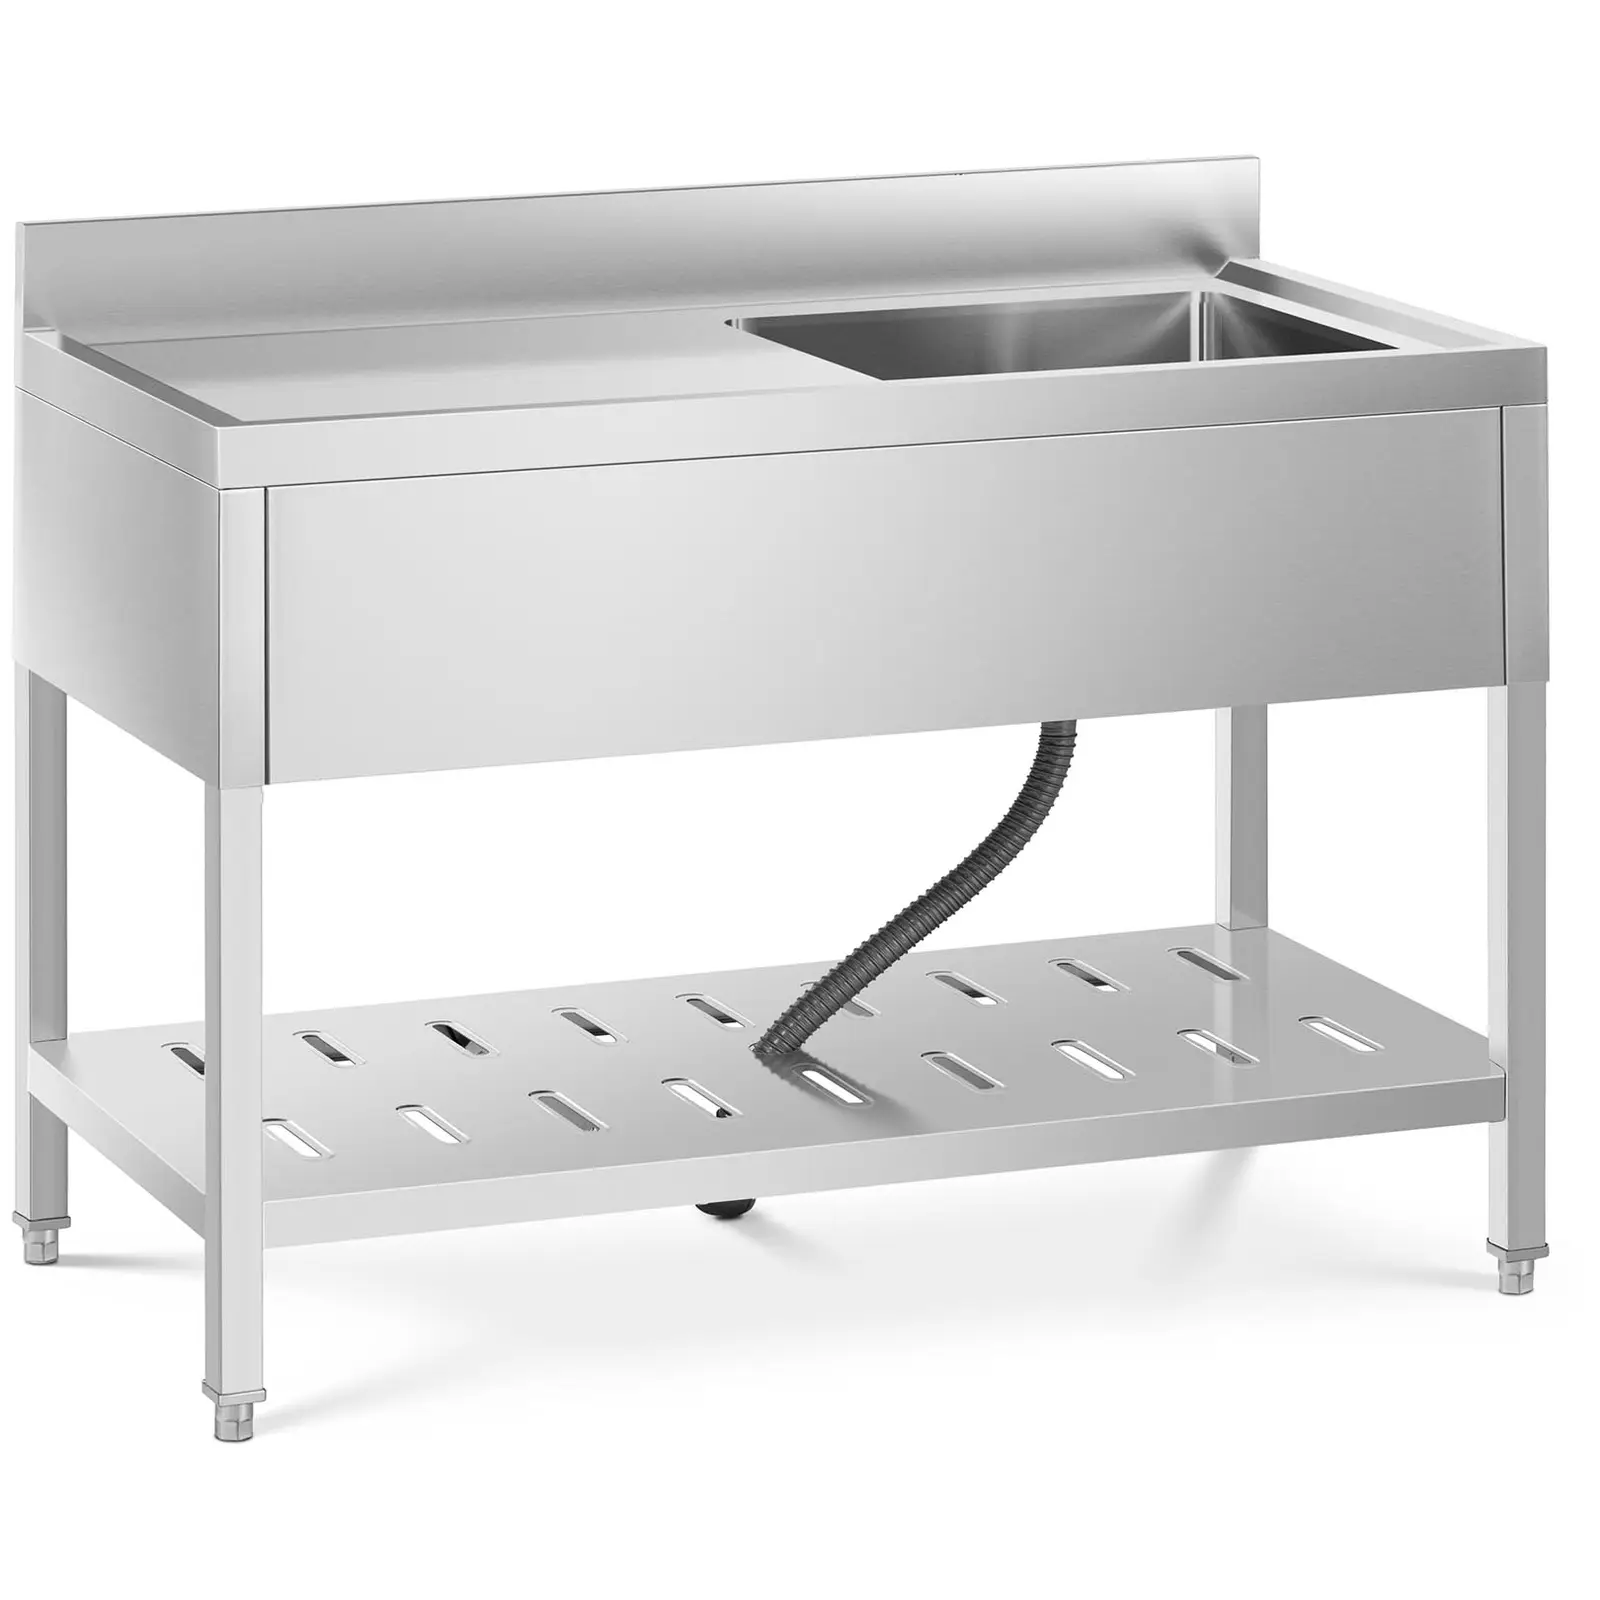 Commercial Kitchen Sink - 1 basin - stainless steel - 49 x 42 x 24.5 cm